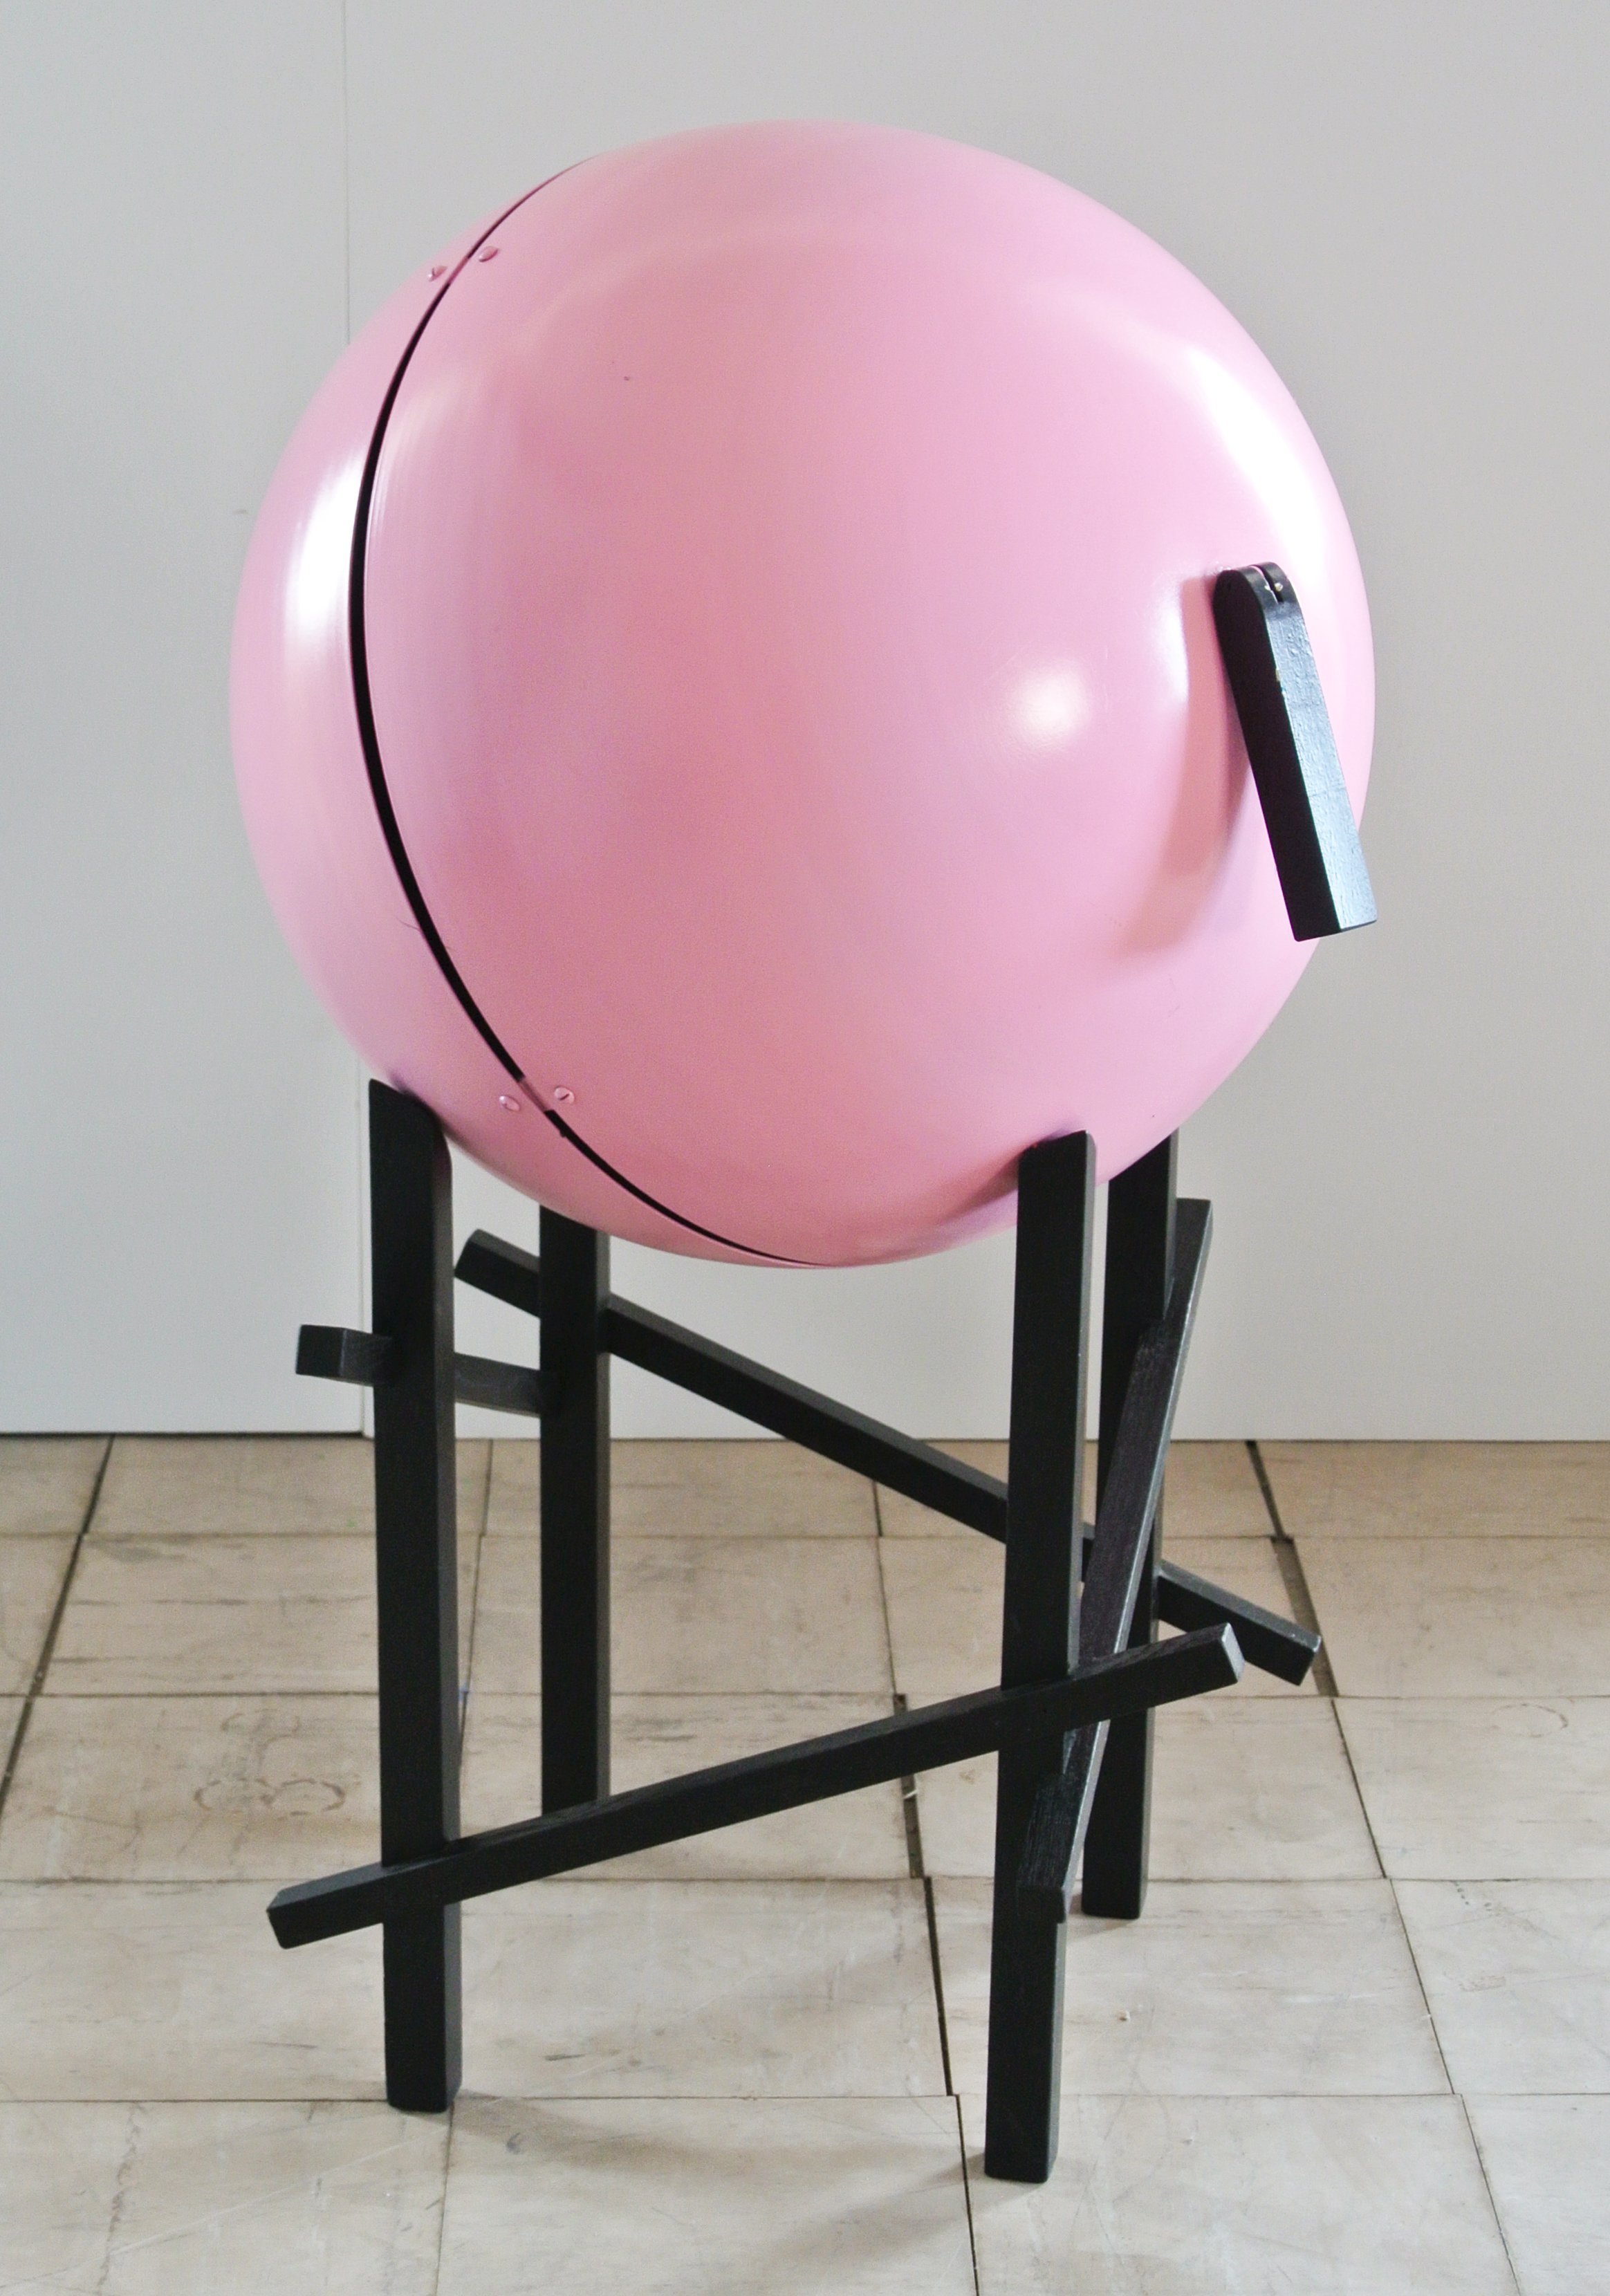 pink sphere, 2012, 01 (percussion instrument, sound from off stage).jpg